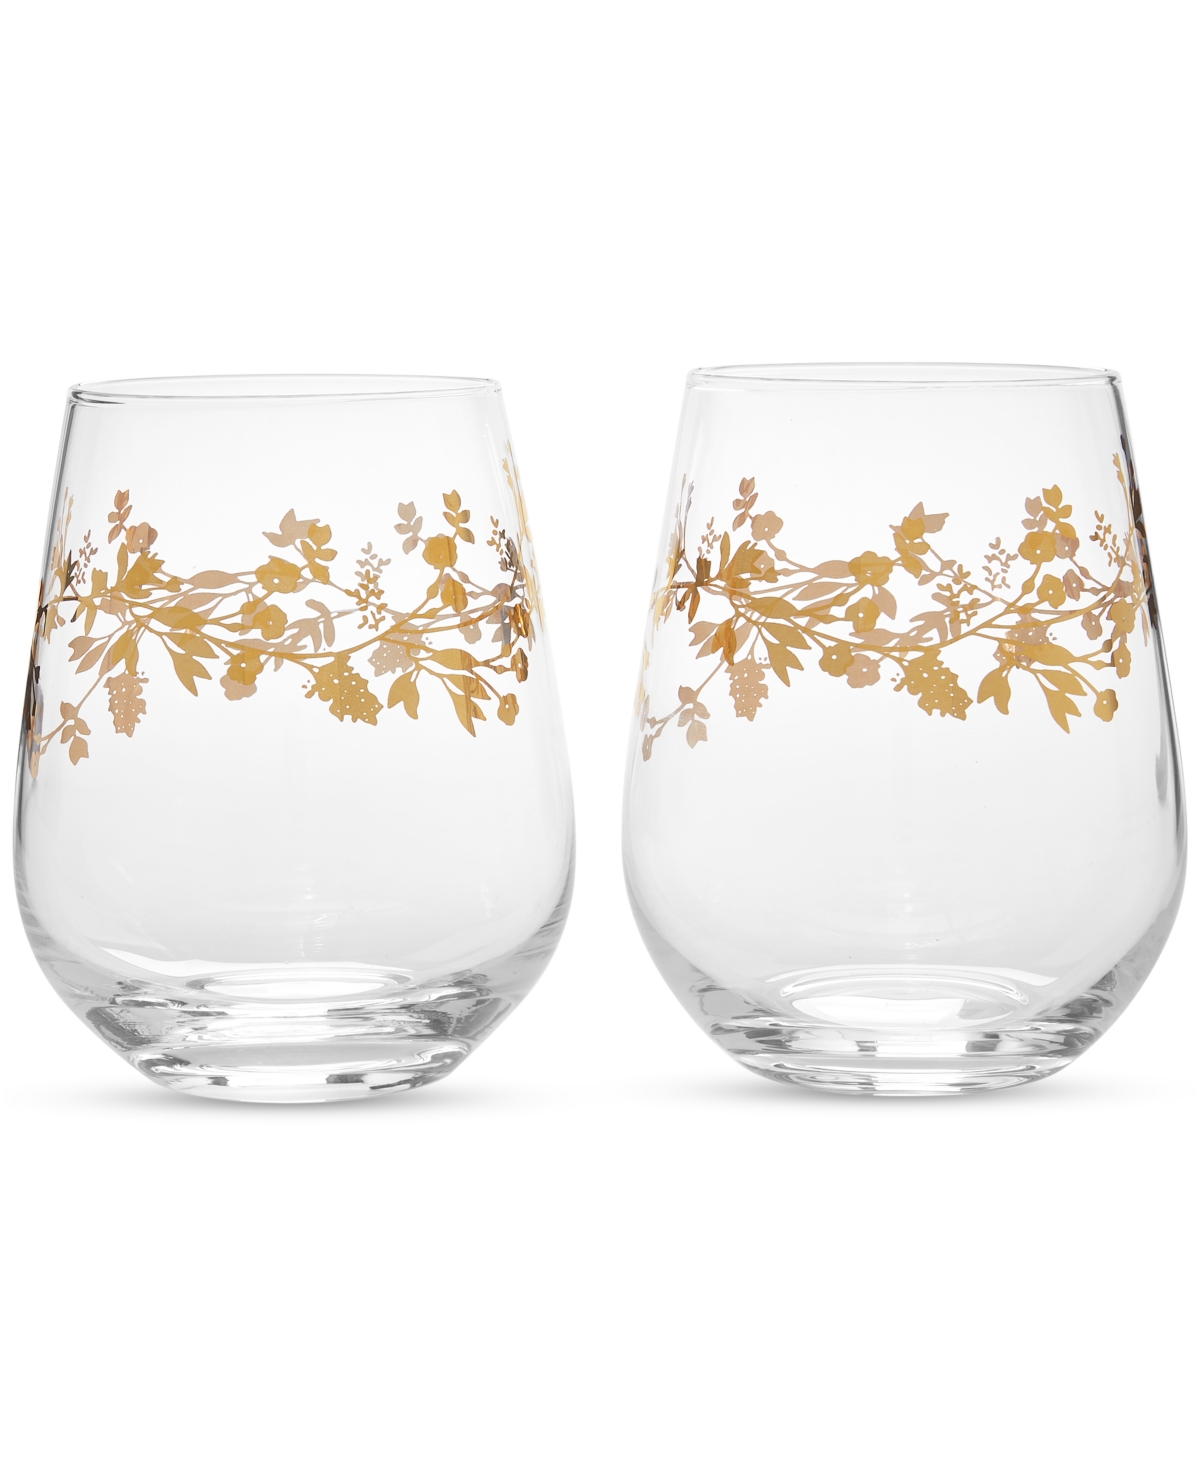 Gilded Stemless Wine Glass, Set of 2, Created for Macy's - Gold